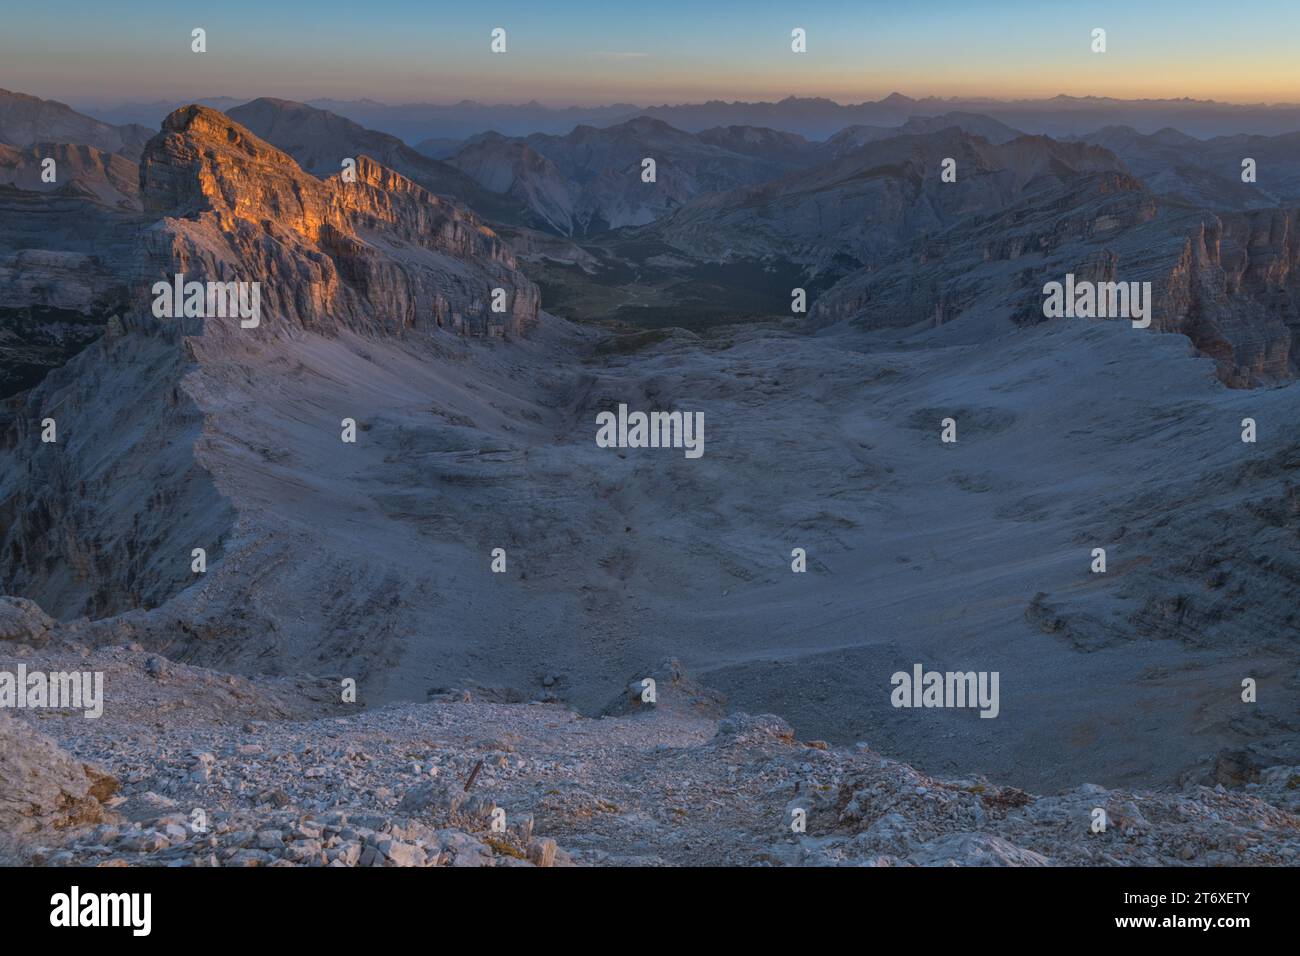 Alpine sunrise in the Dolomites, views of Vallon Bianco in the Fanes park with rocky butte and scree slopes. Stock Photo